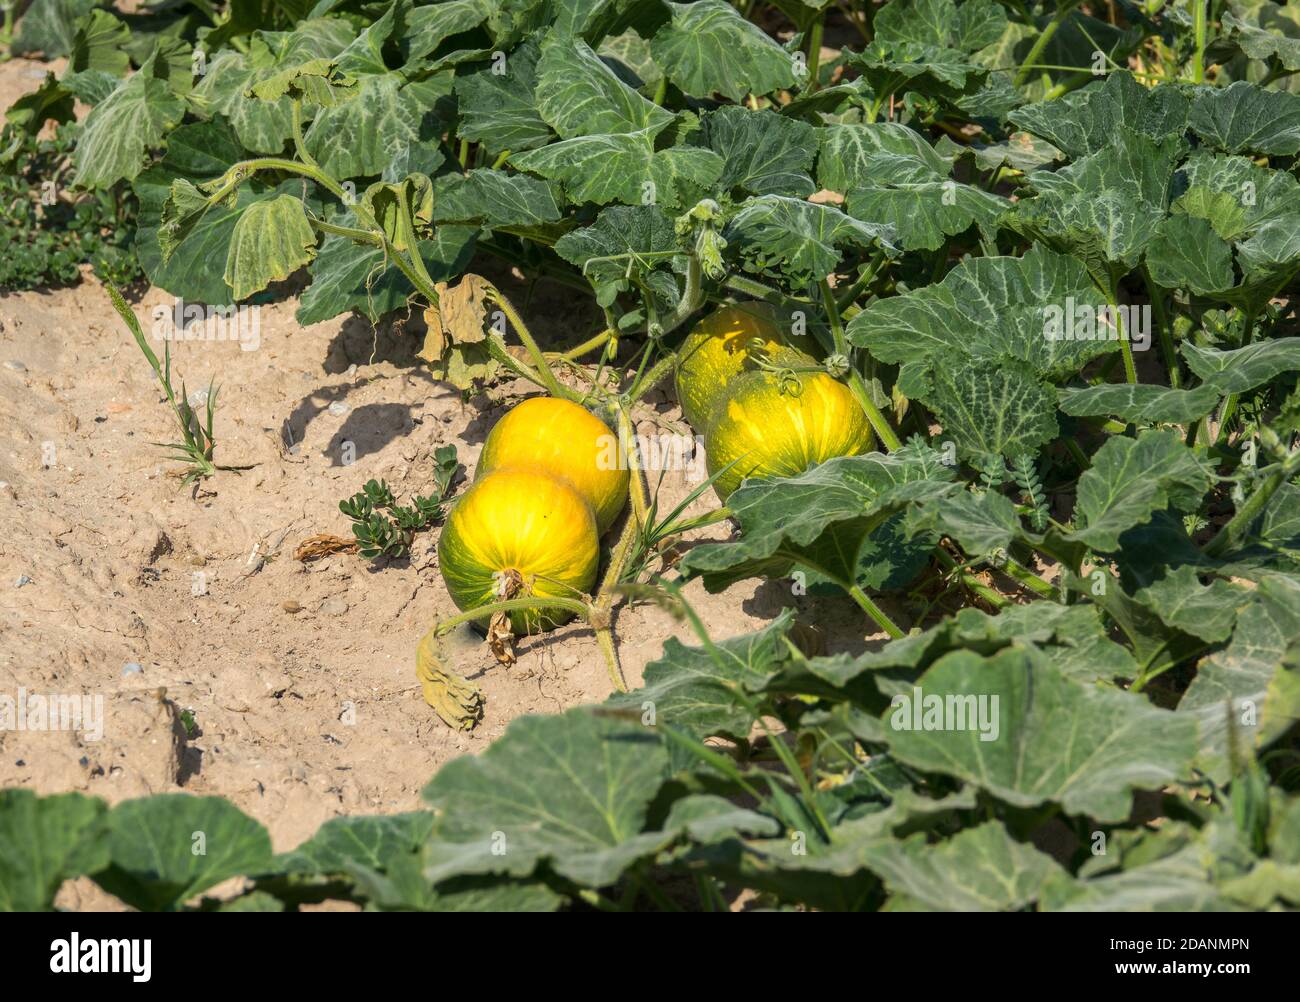 gourd, calabash, cucurbit entire plant with root and flowers, creeping plant on the ground Stock Photo